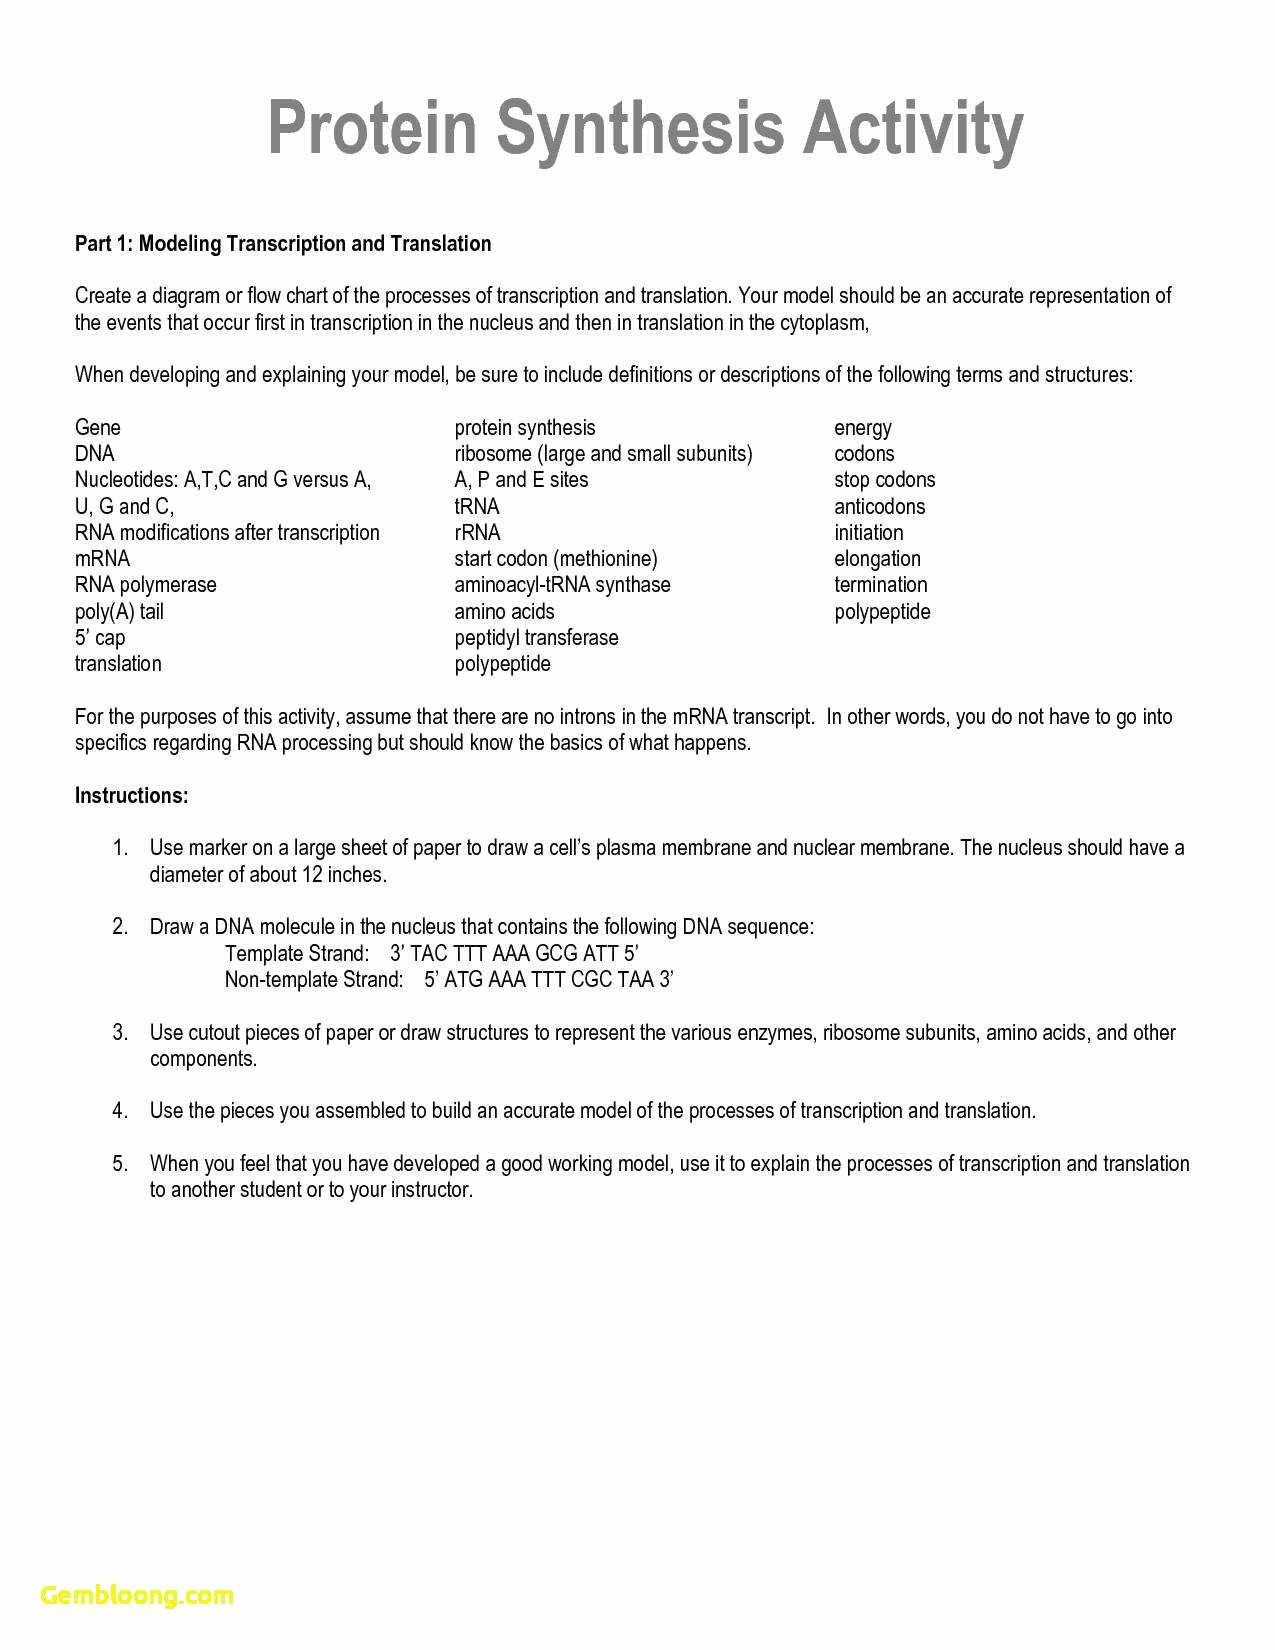 Enzyme Reactions Worksheet Answer Key Awesome Enzyme Reactions Worksheet Answer Key Cramerforcongress